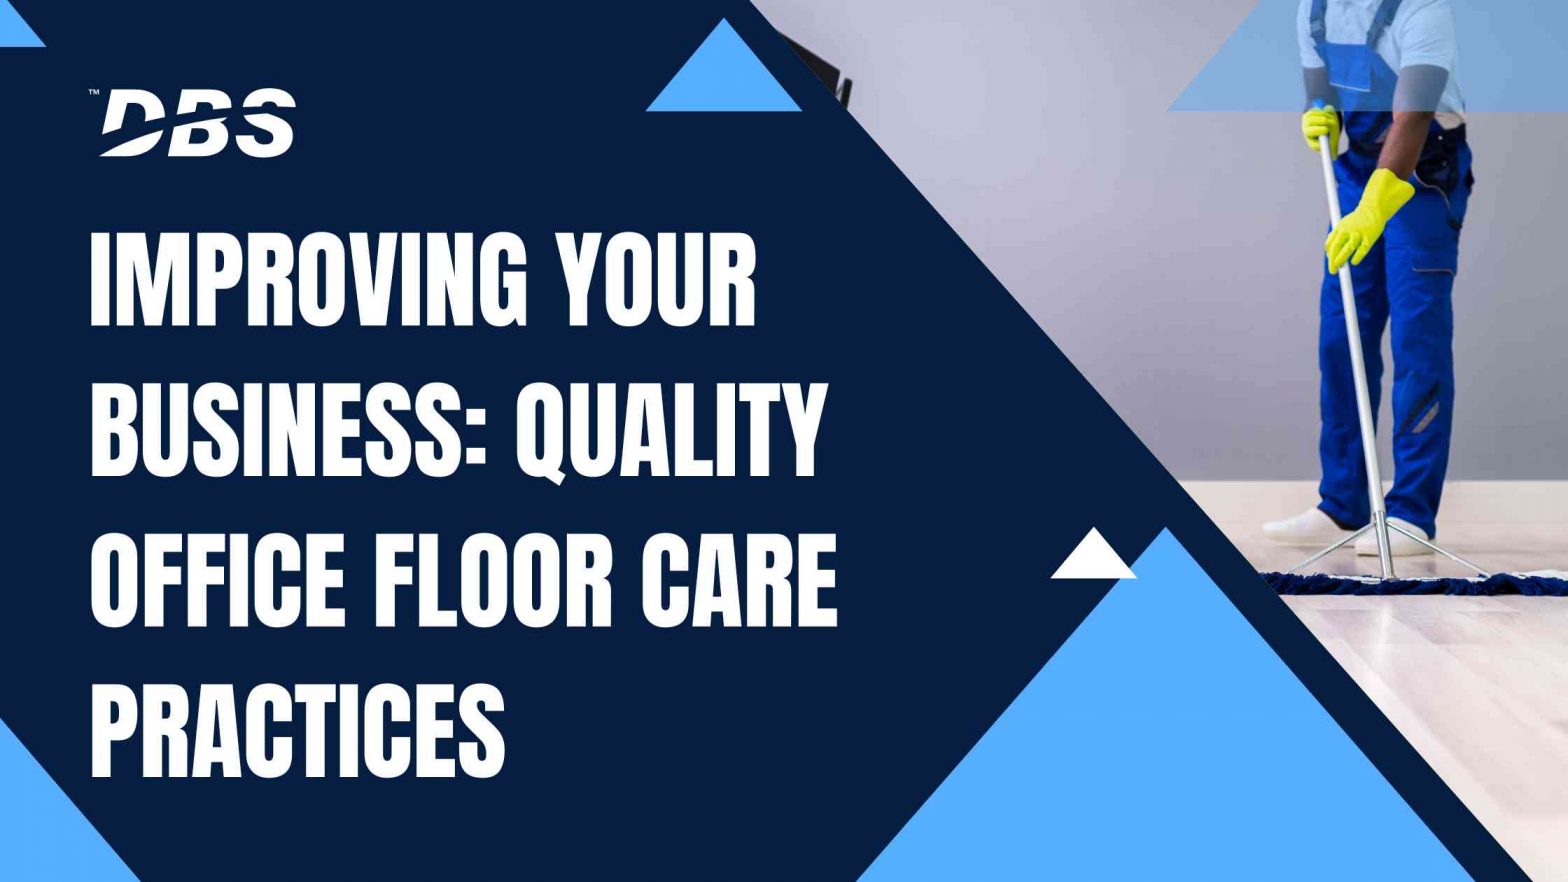 Quality office floor care practices